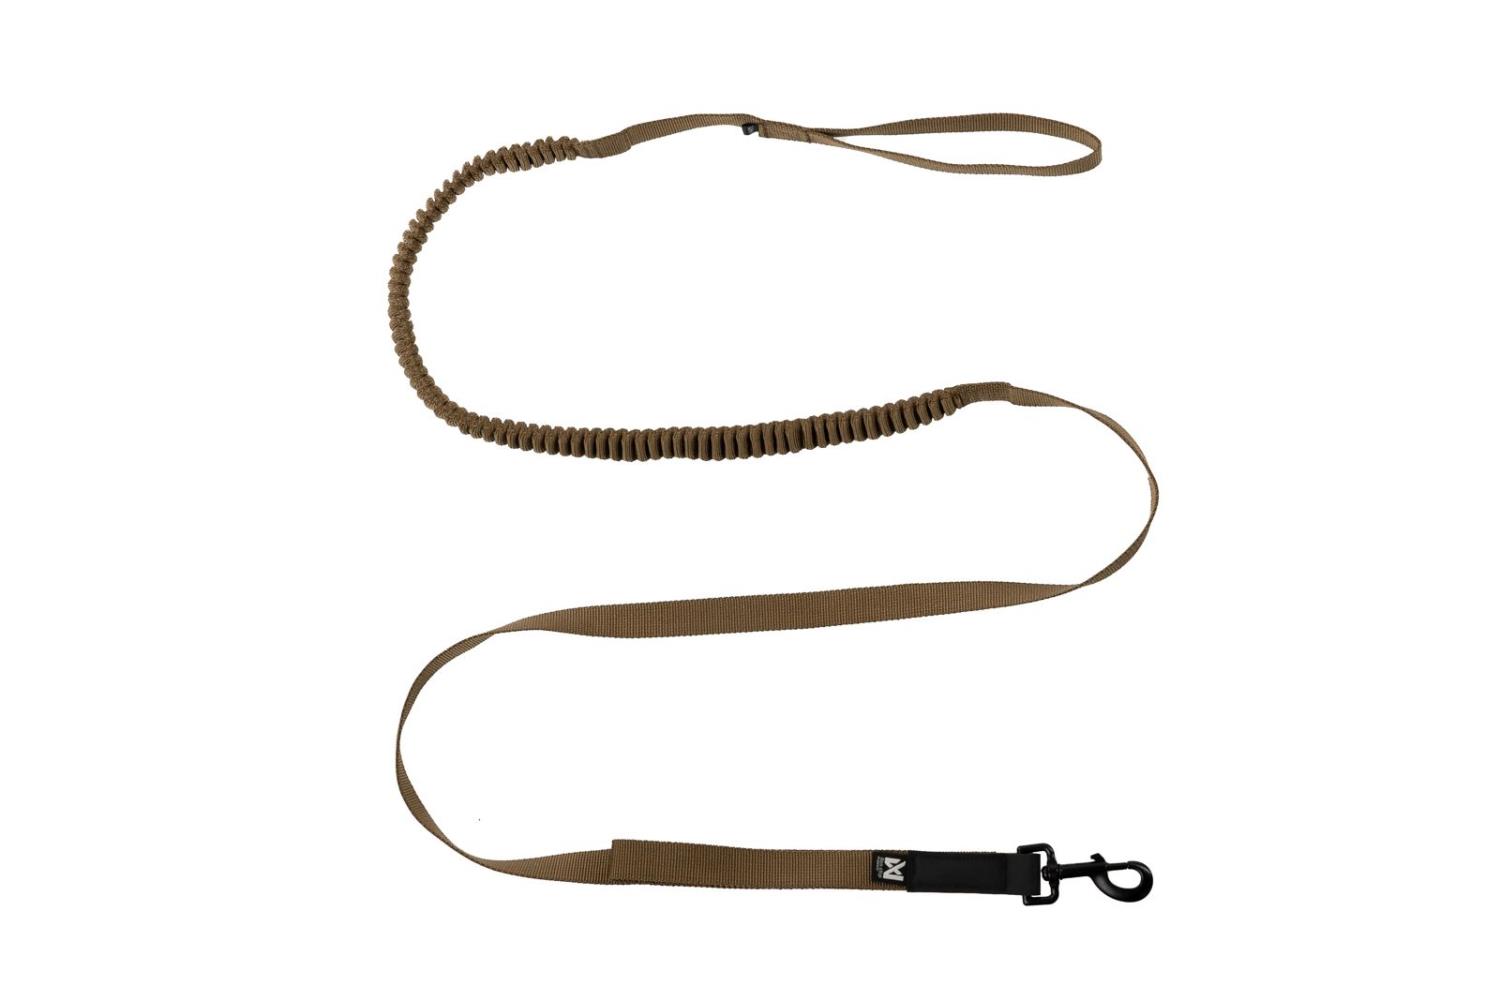 Touring bungee leash WD, unisex, olive, 2.8m/23mm, single